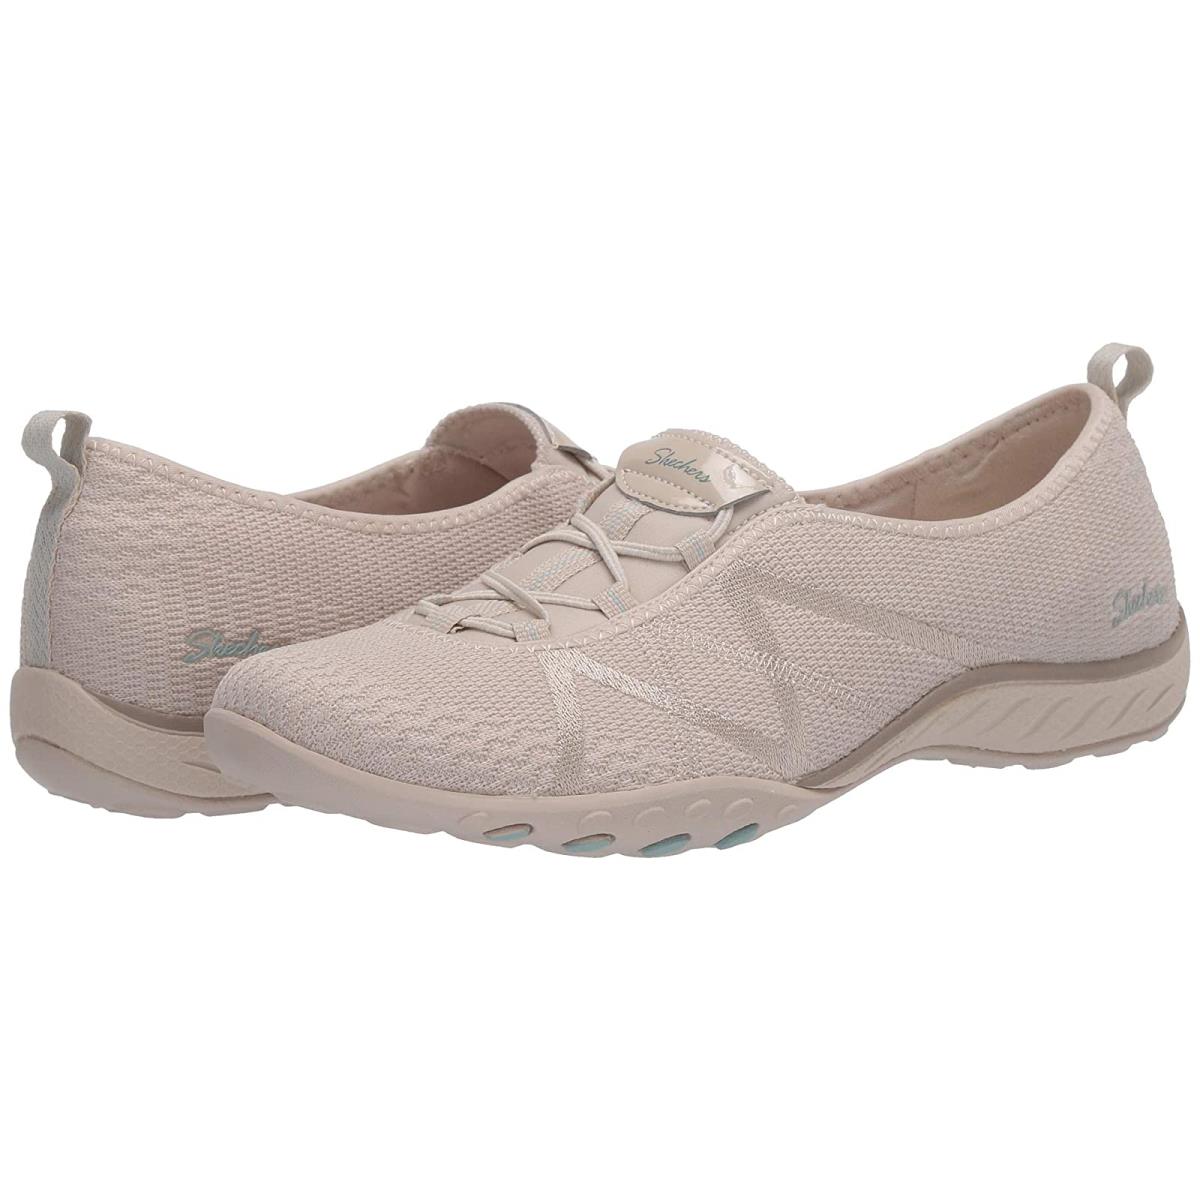 Woman`s Sneakers Athletic Shoes Skechers Breathe-easy - A Look Natural